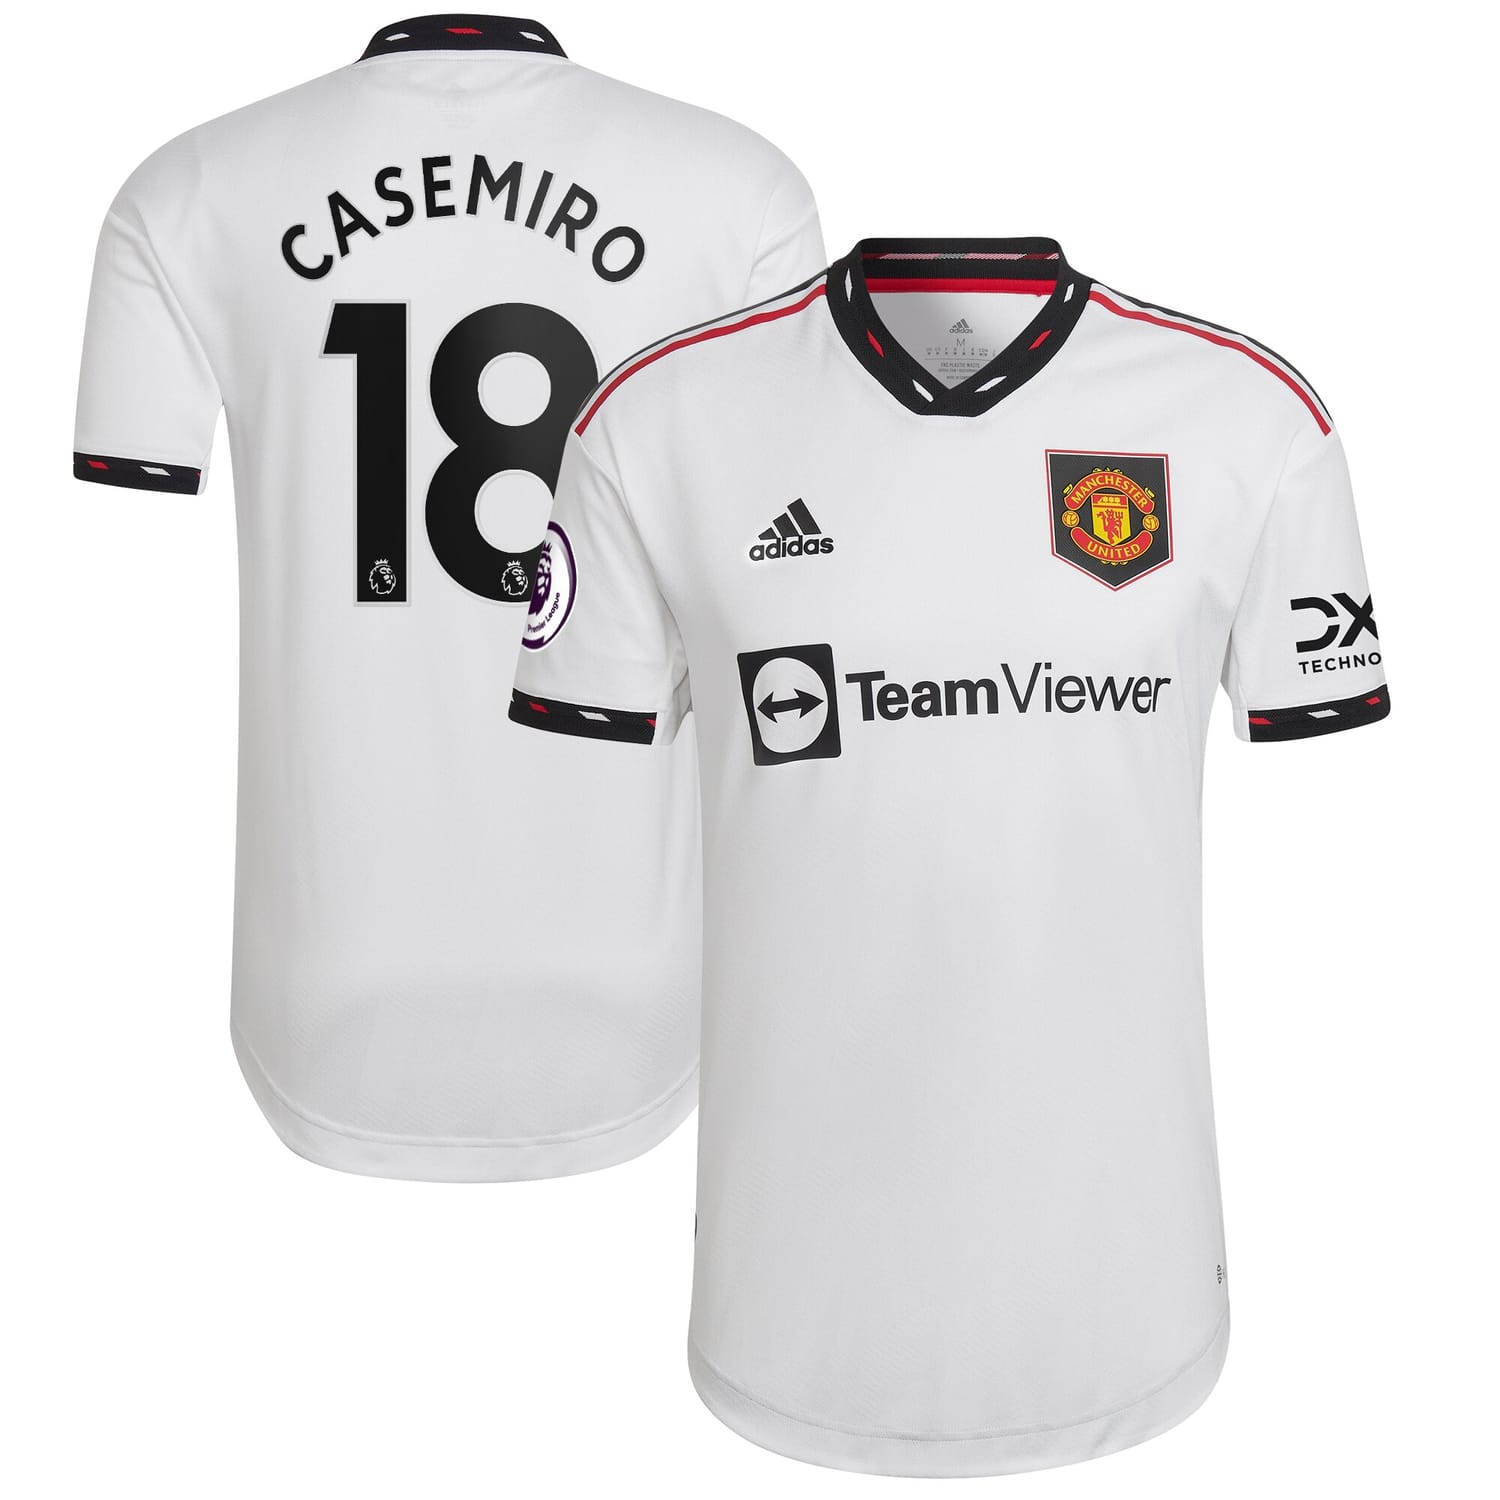 Premier League Manchester United Away Authentic Jersey Shirt White 2022-23 player Casemiro printing for Men